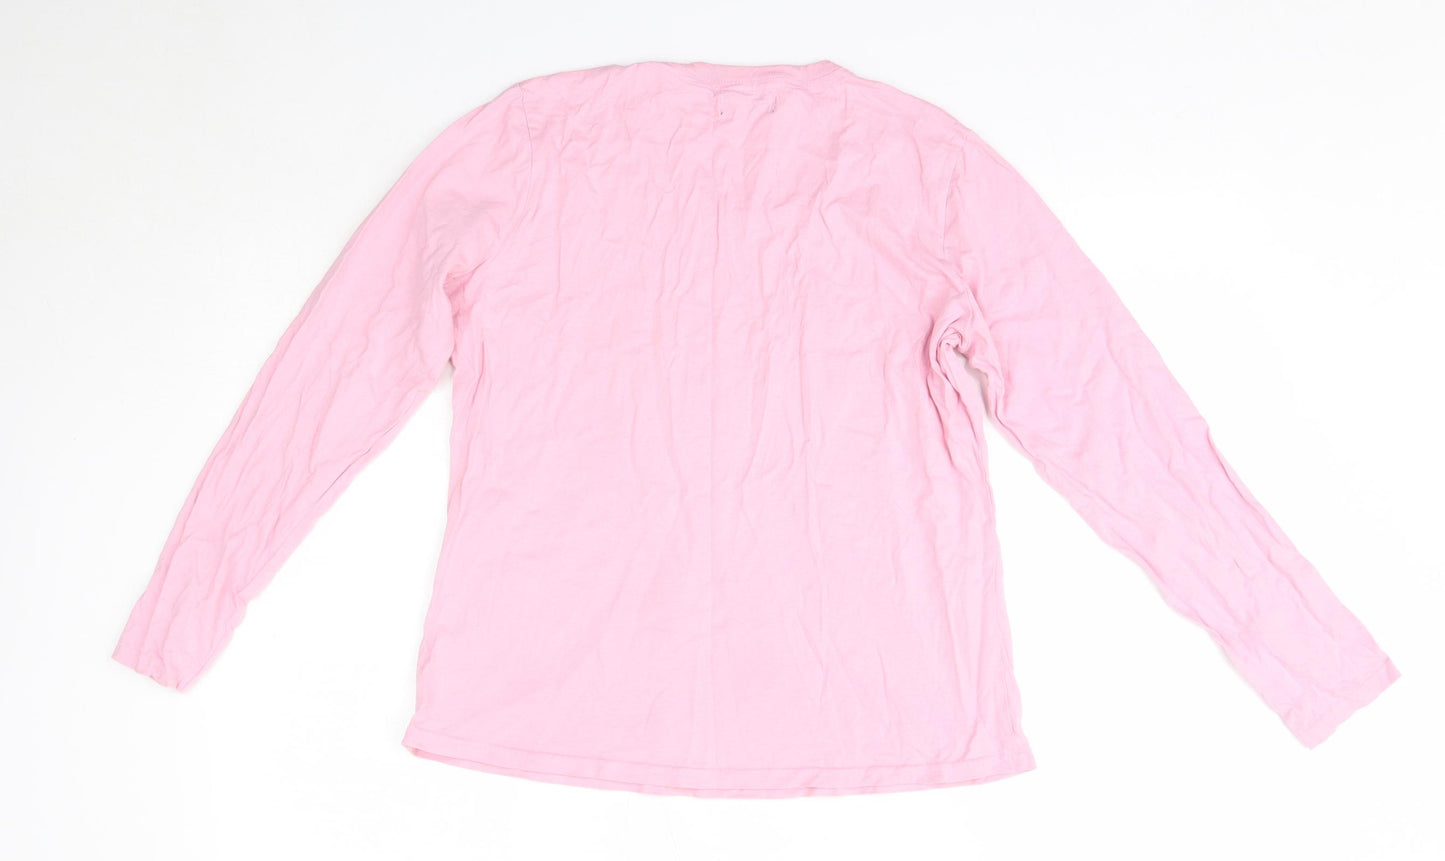 F&F Womens Pink Solid 100% Cotton Top Pyjama Top Size 12   - Christmas